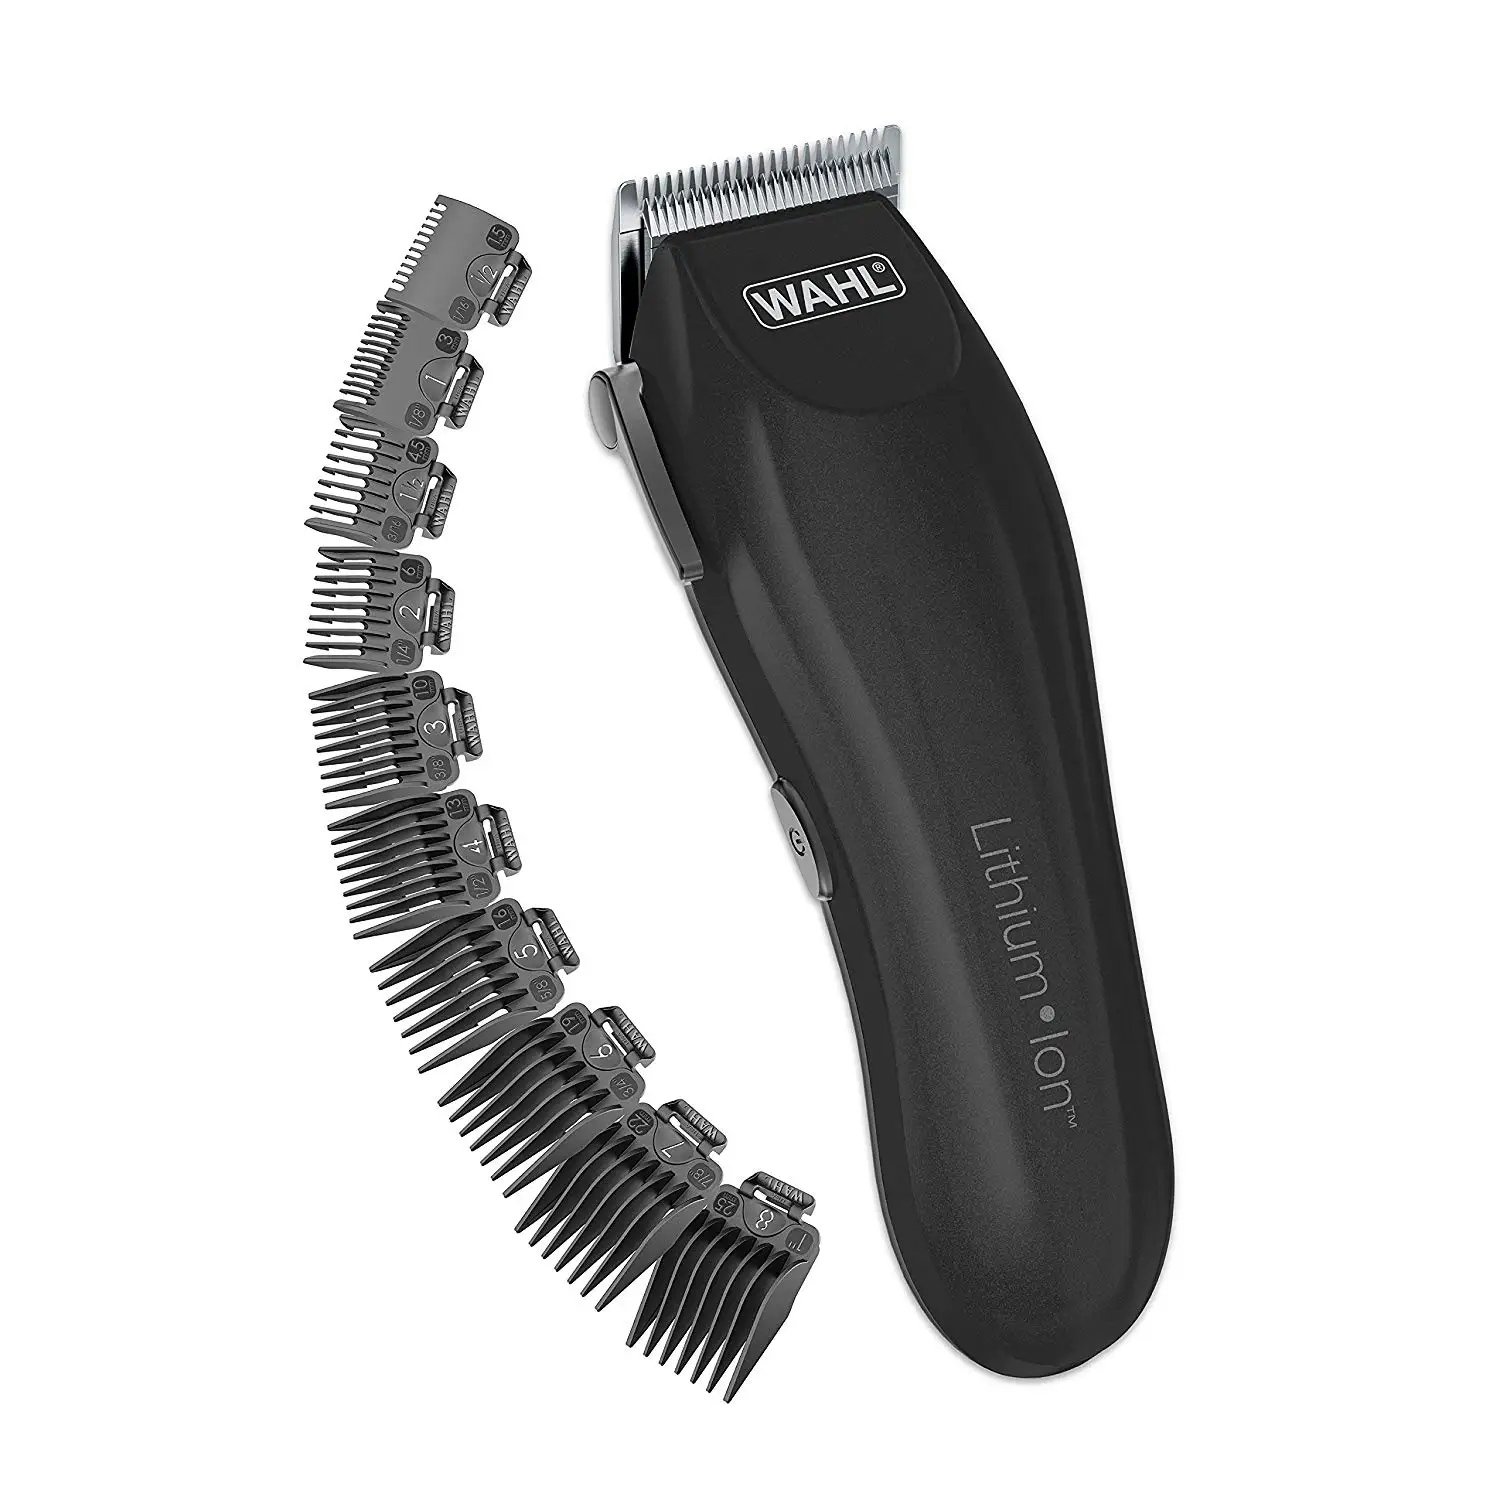 wahl cordless lithium ion